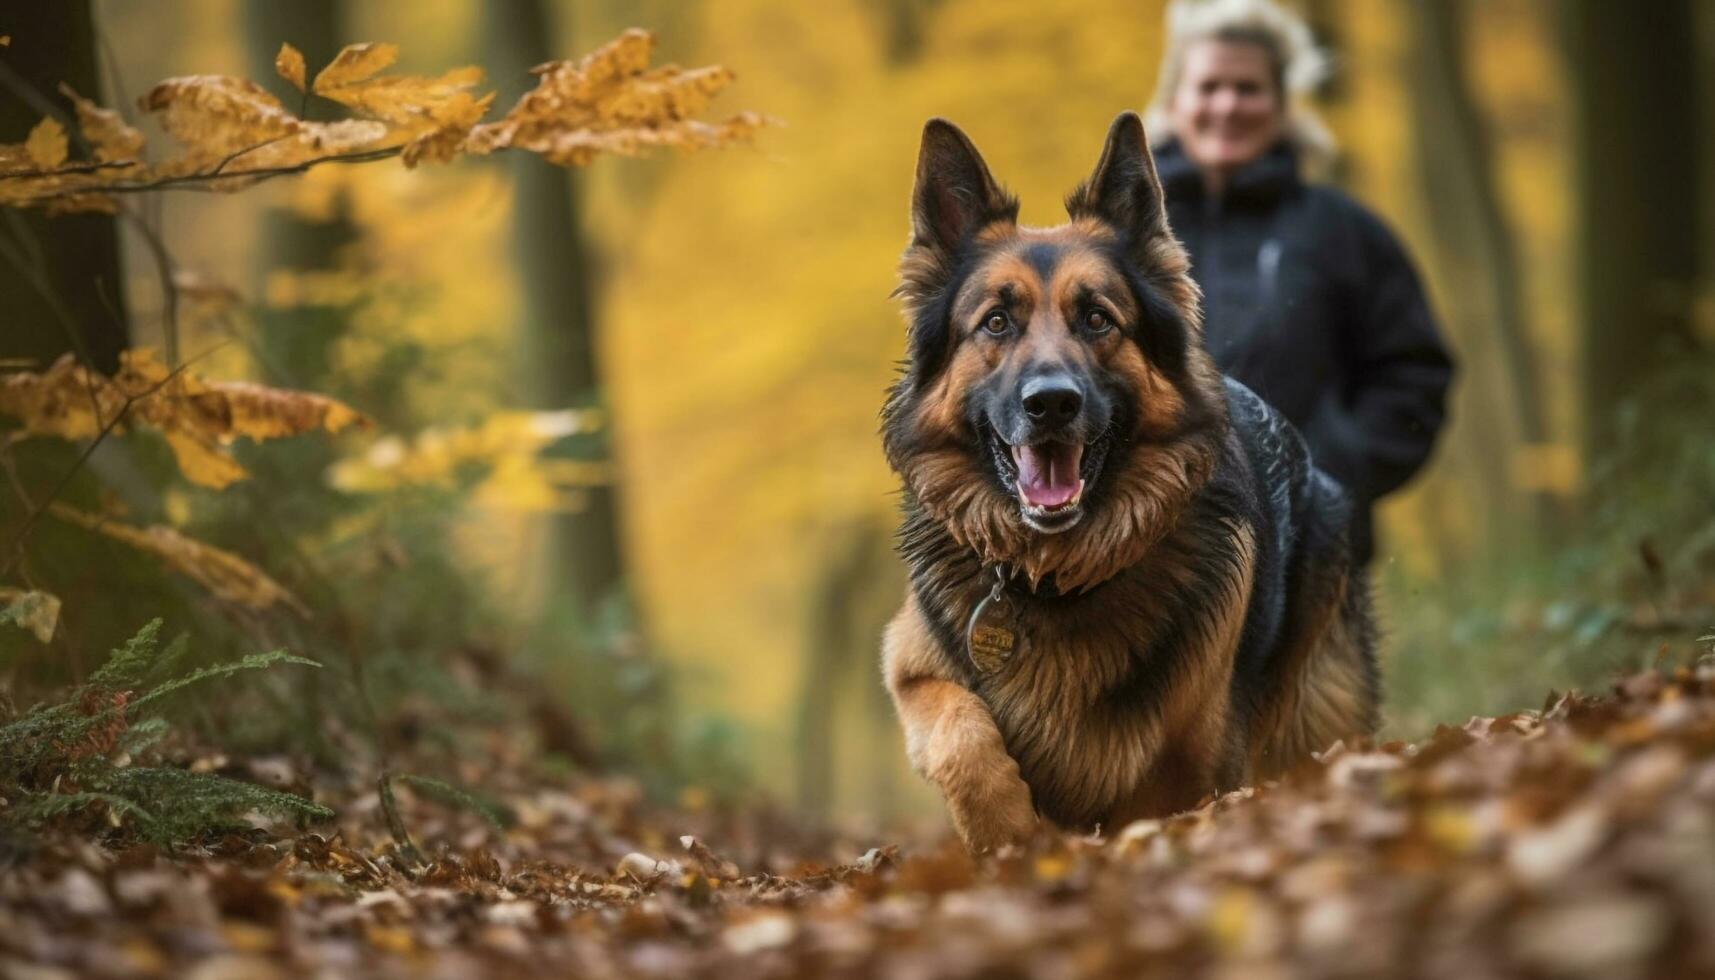 Cute German Shepherd puppy playing outdoors in autumn forest generated by AI photo